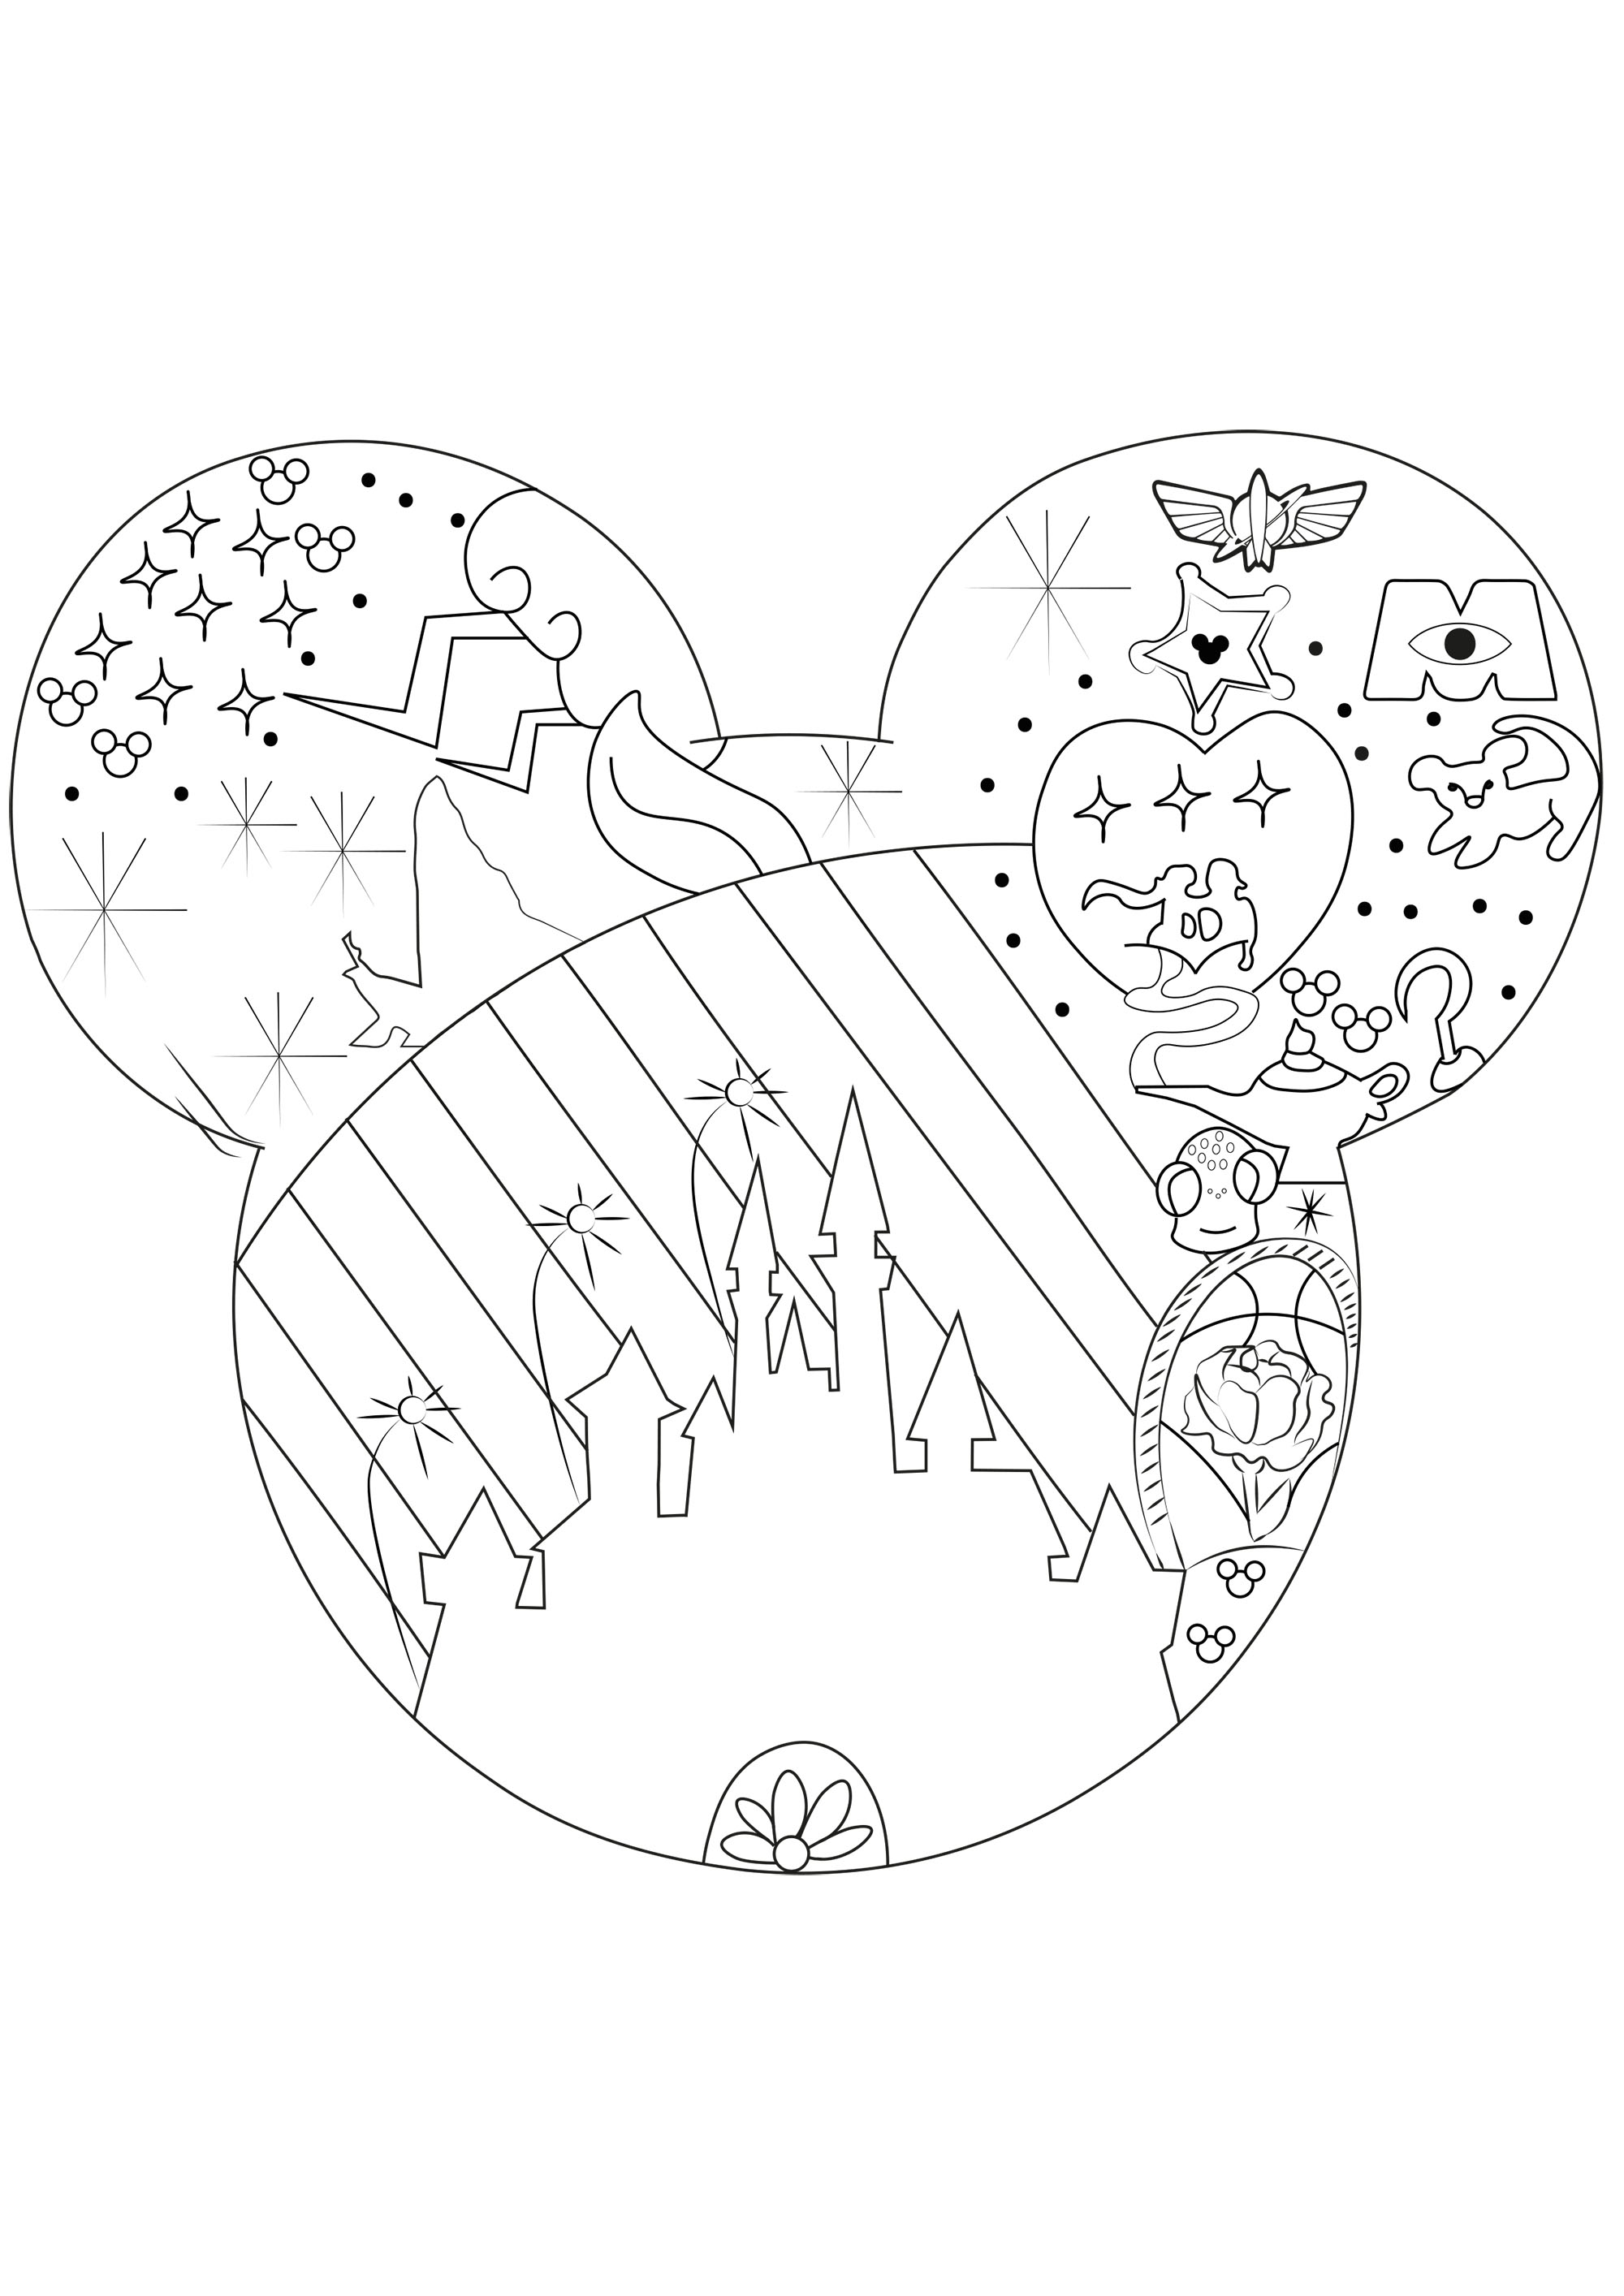 Disney universe - Return to childhood Adult Coloring Pages